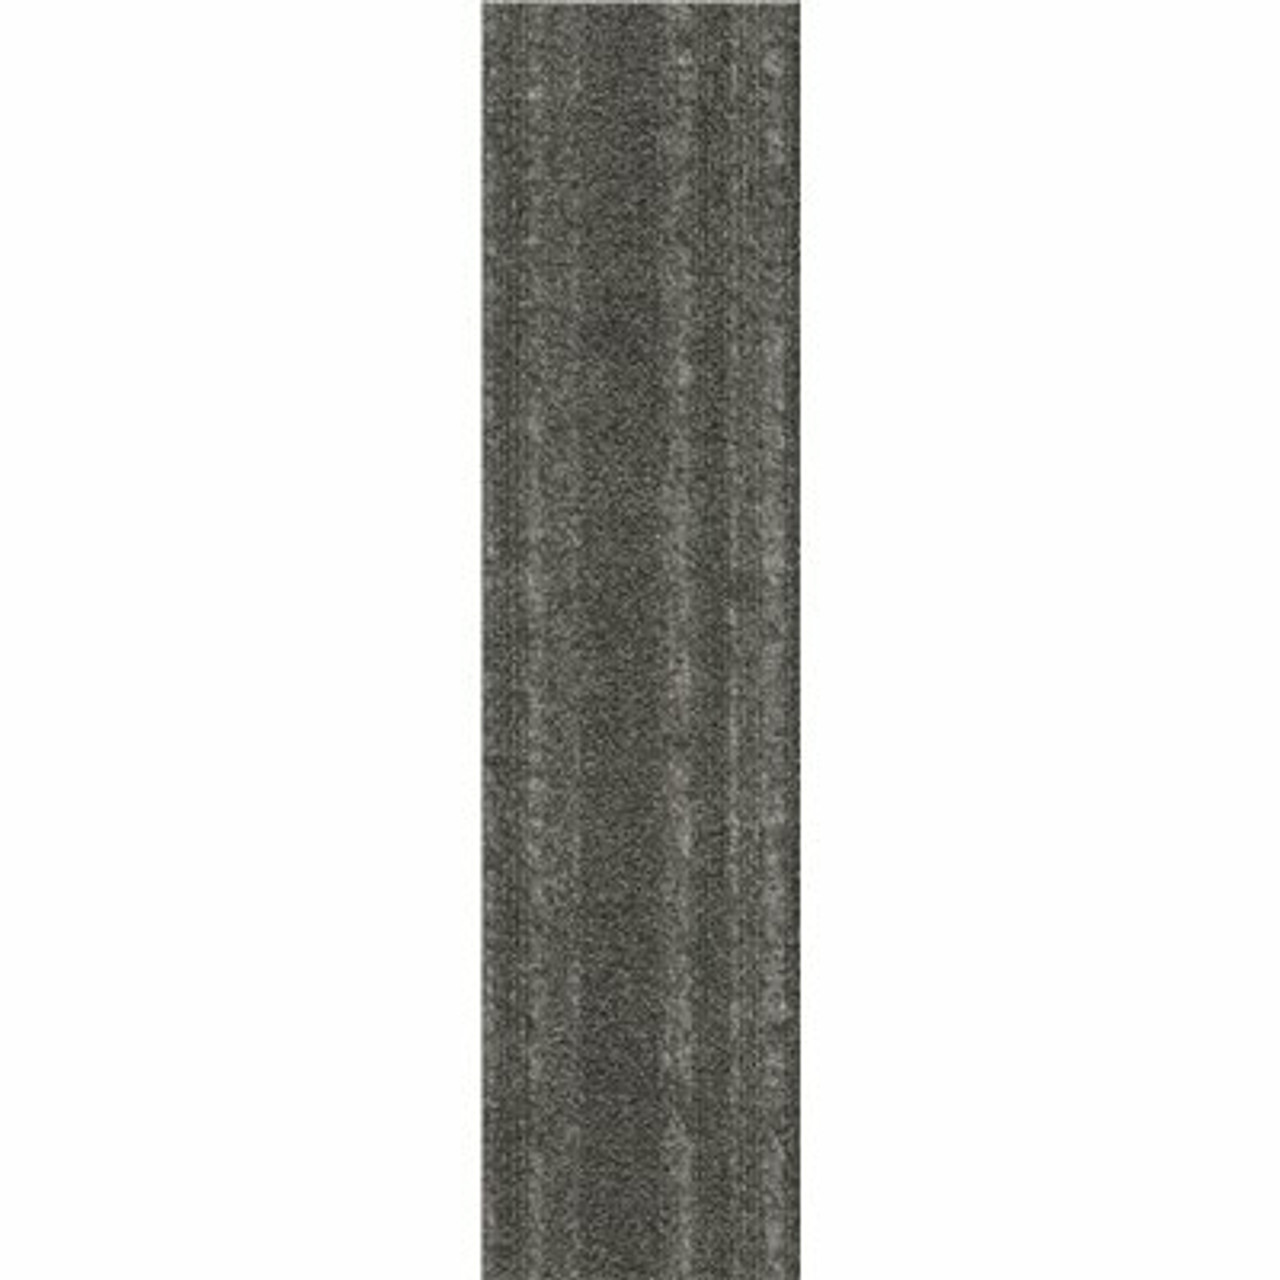 Foss Peel And Stick Sky Grey Barcode Planks 9 In. X 36 In. Commercial/Residential Carpet (16-Tile / Case)